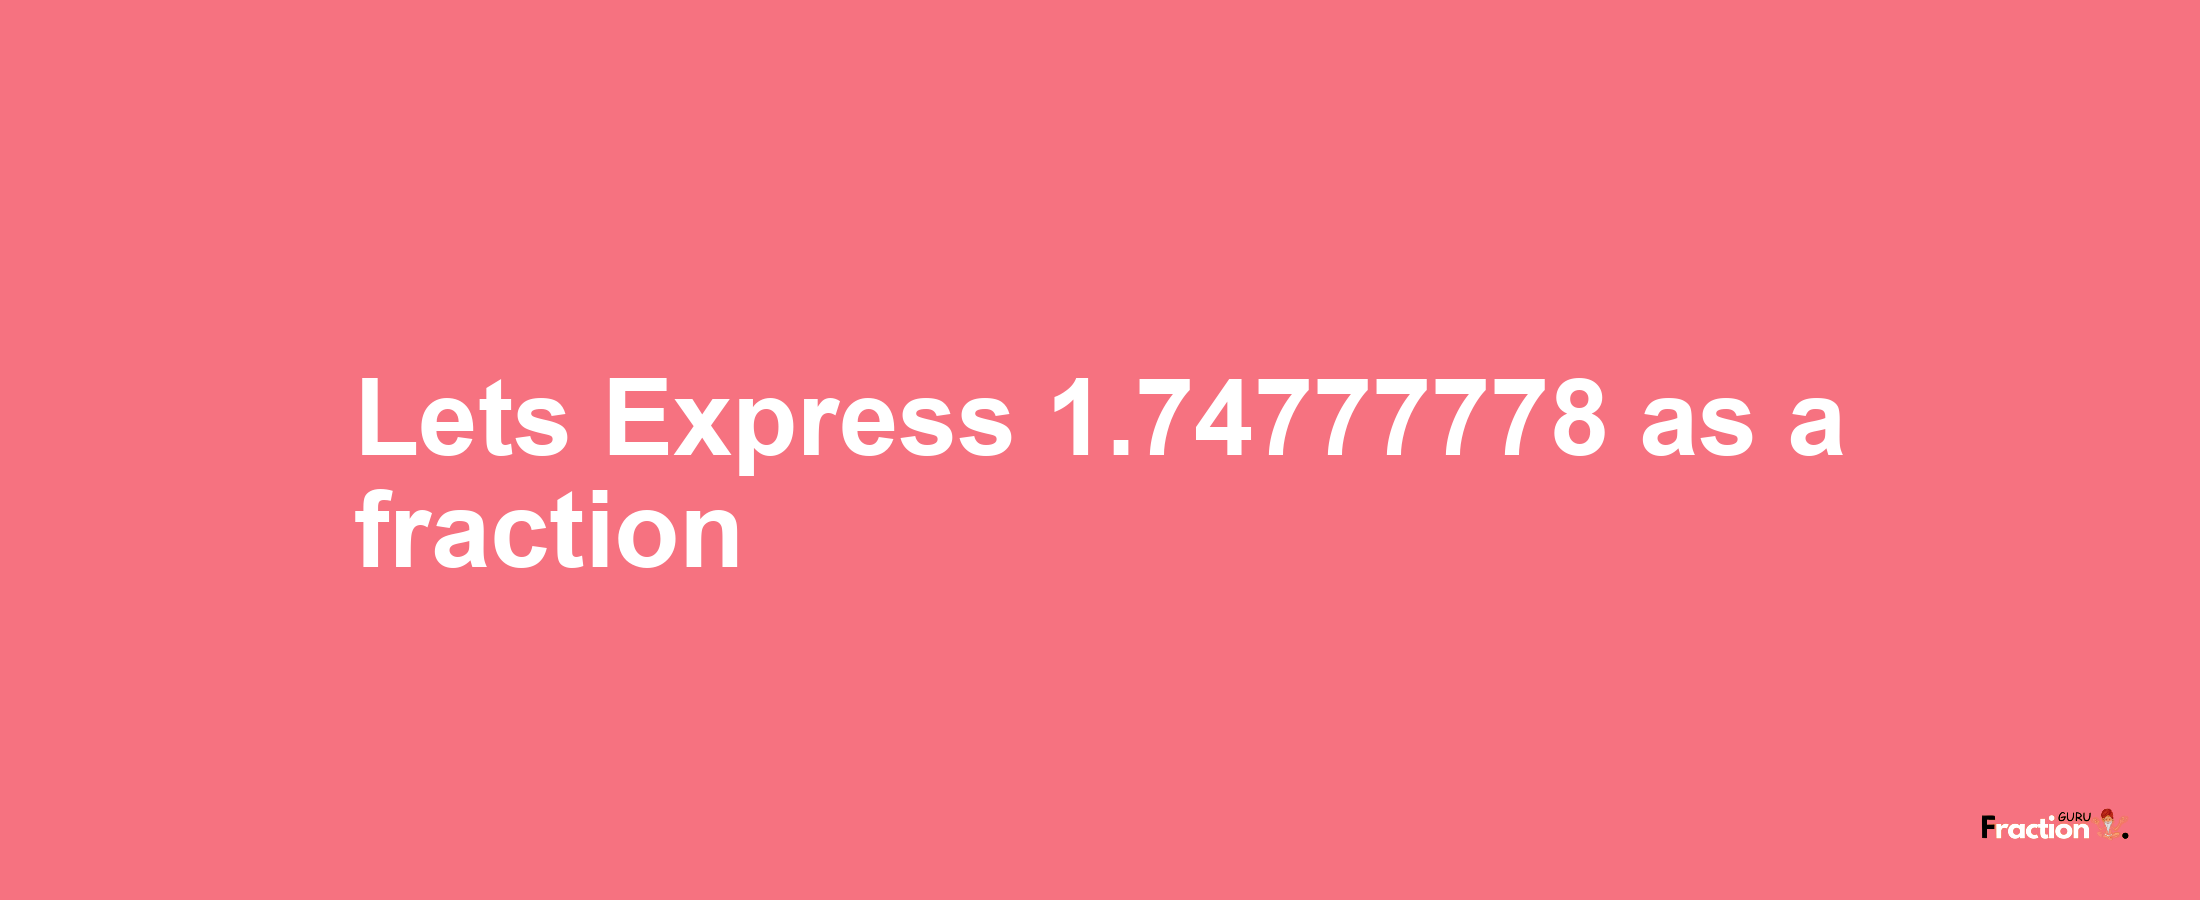 Lets Express 1.74777778 as afraction